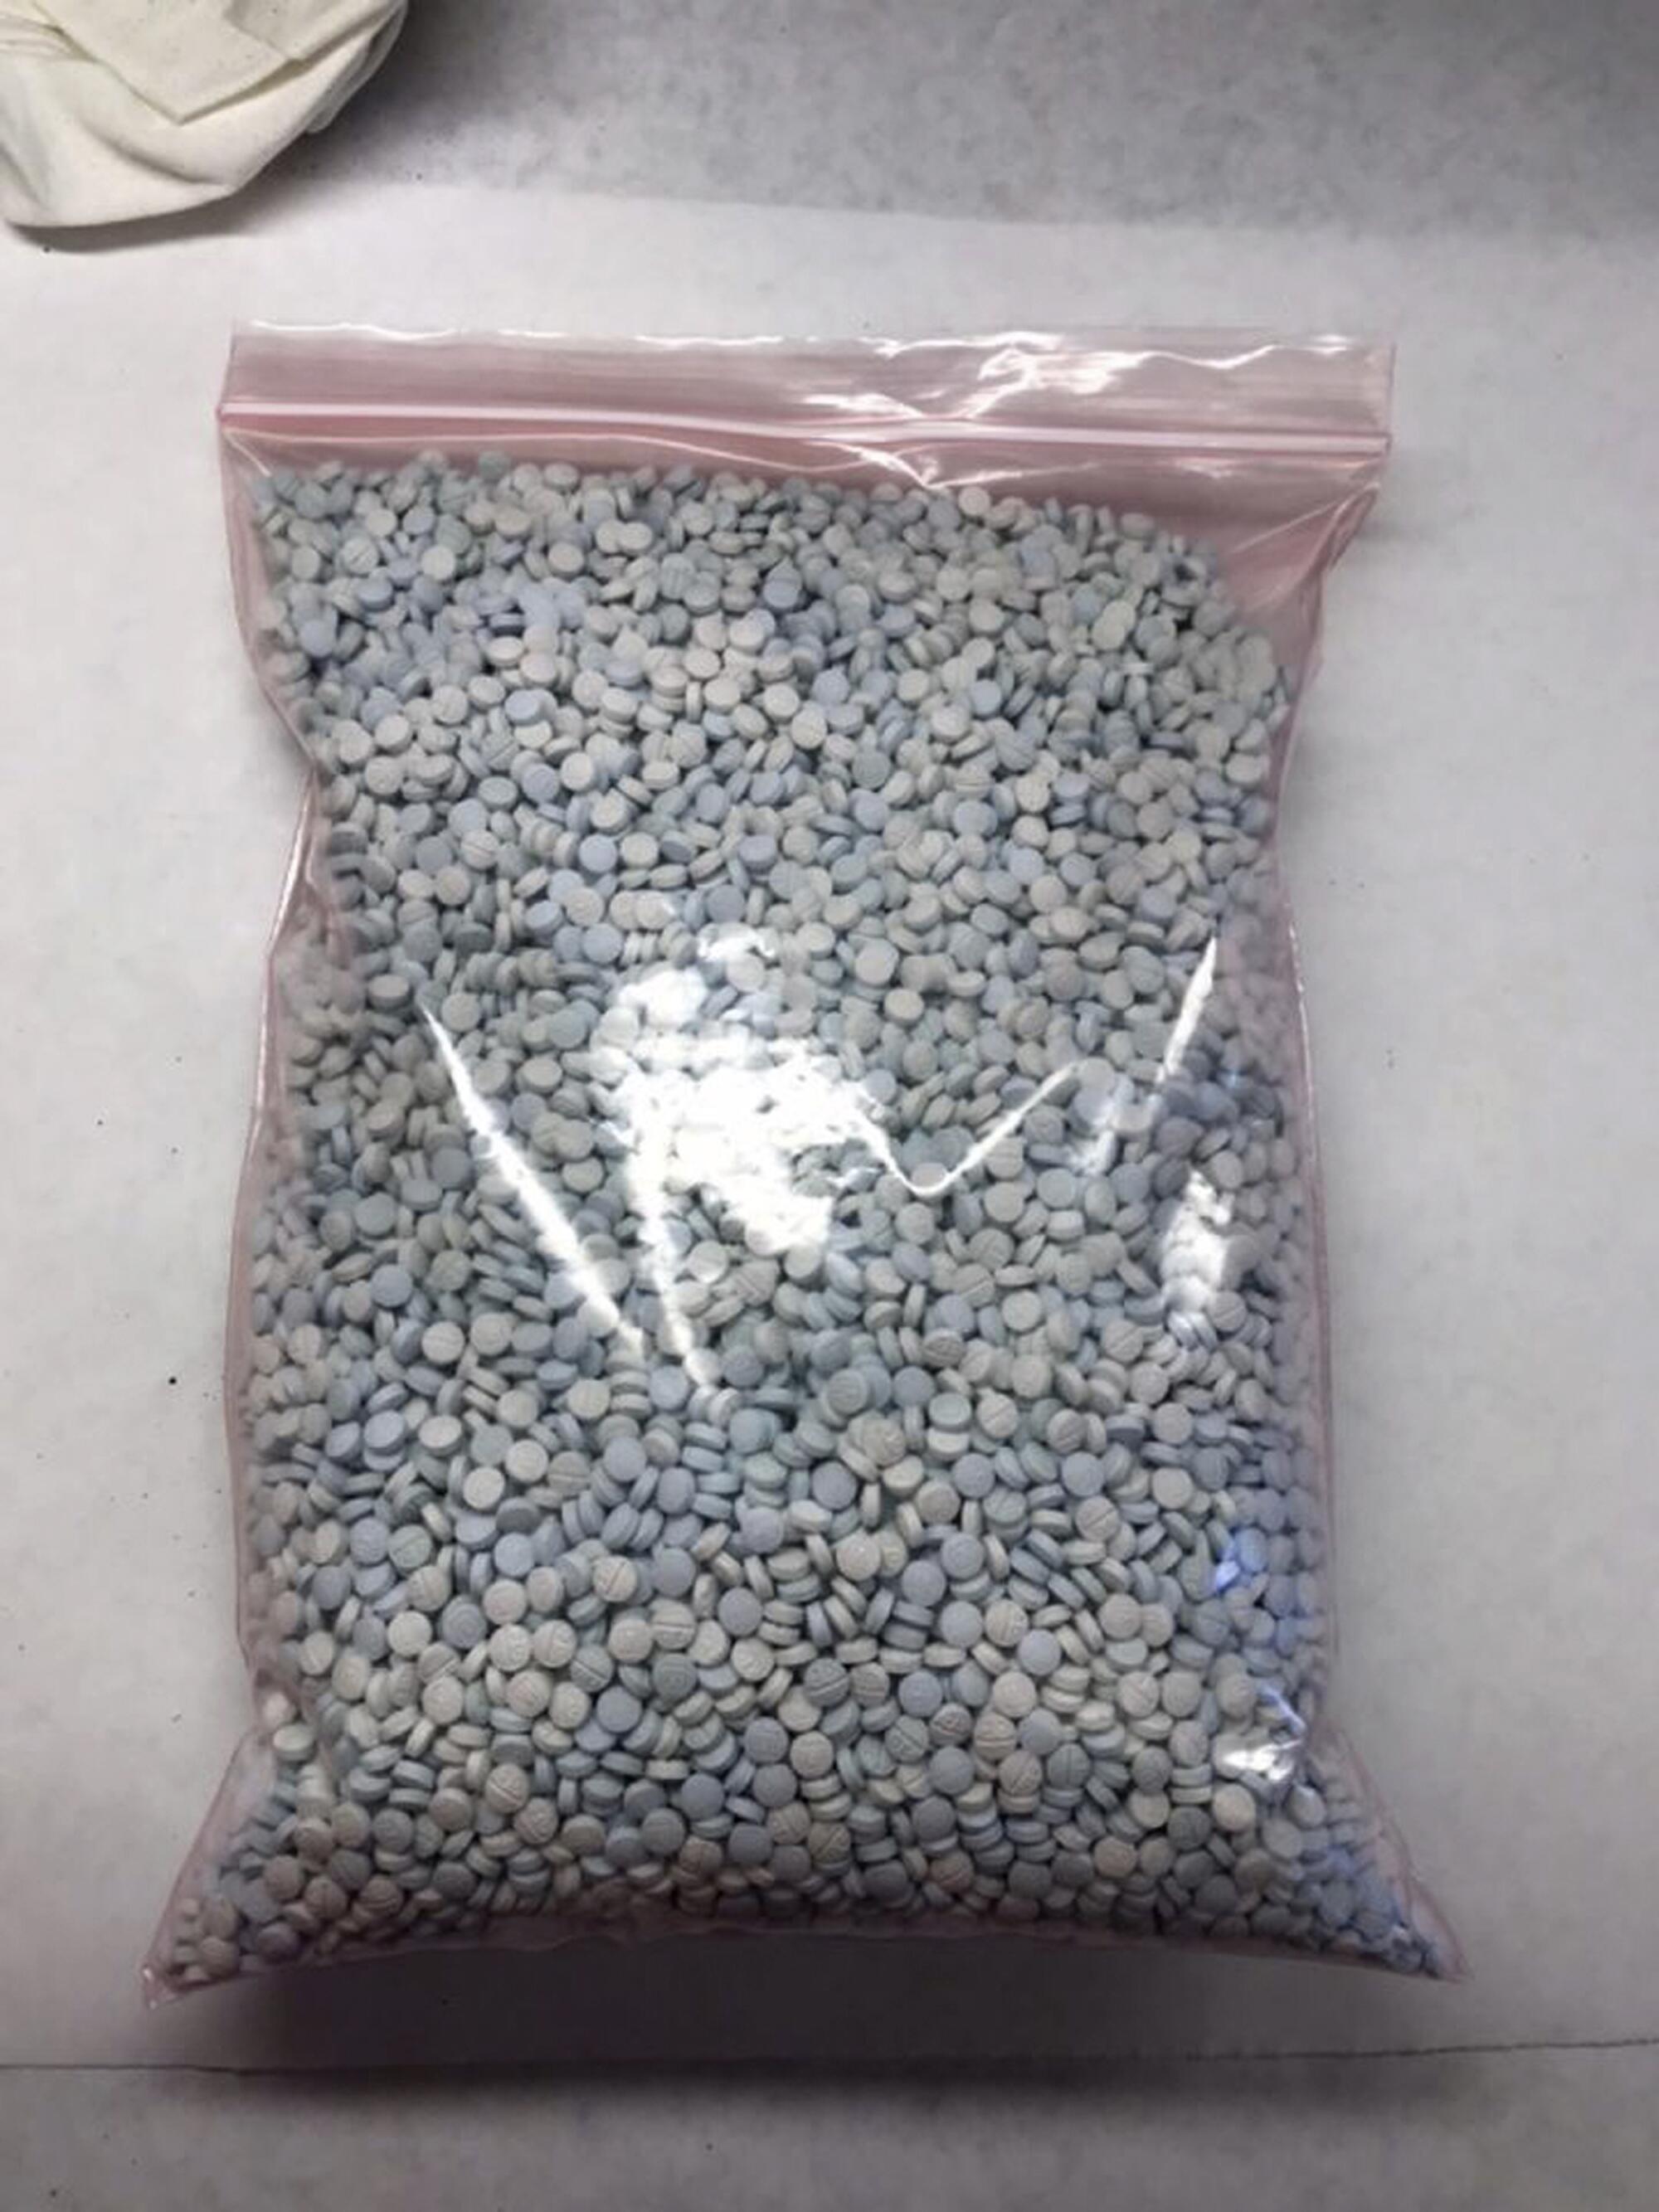 Some of the 1.1 million fentanyl pills that have been seized in Arizona this fiscal year. The pills known as "Mexican oxy" are largely manufactured south of the border and smuggled into the United States by drug cartels.